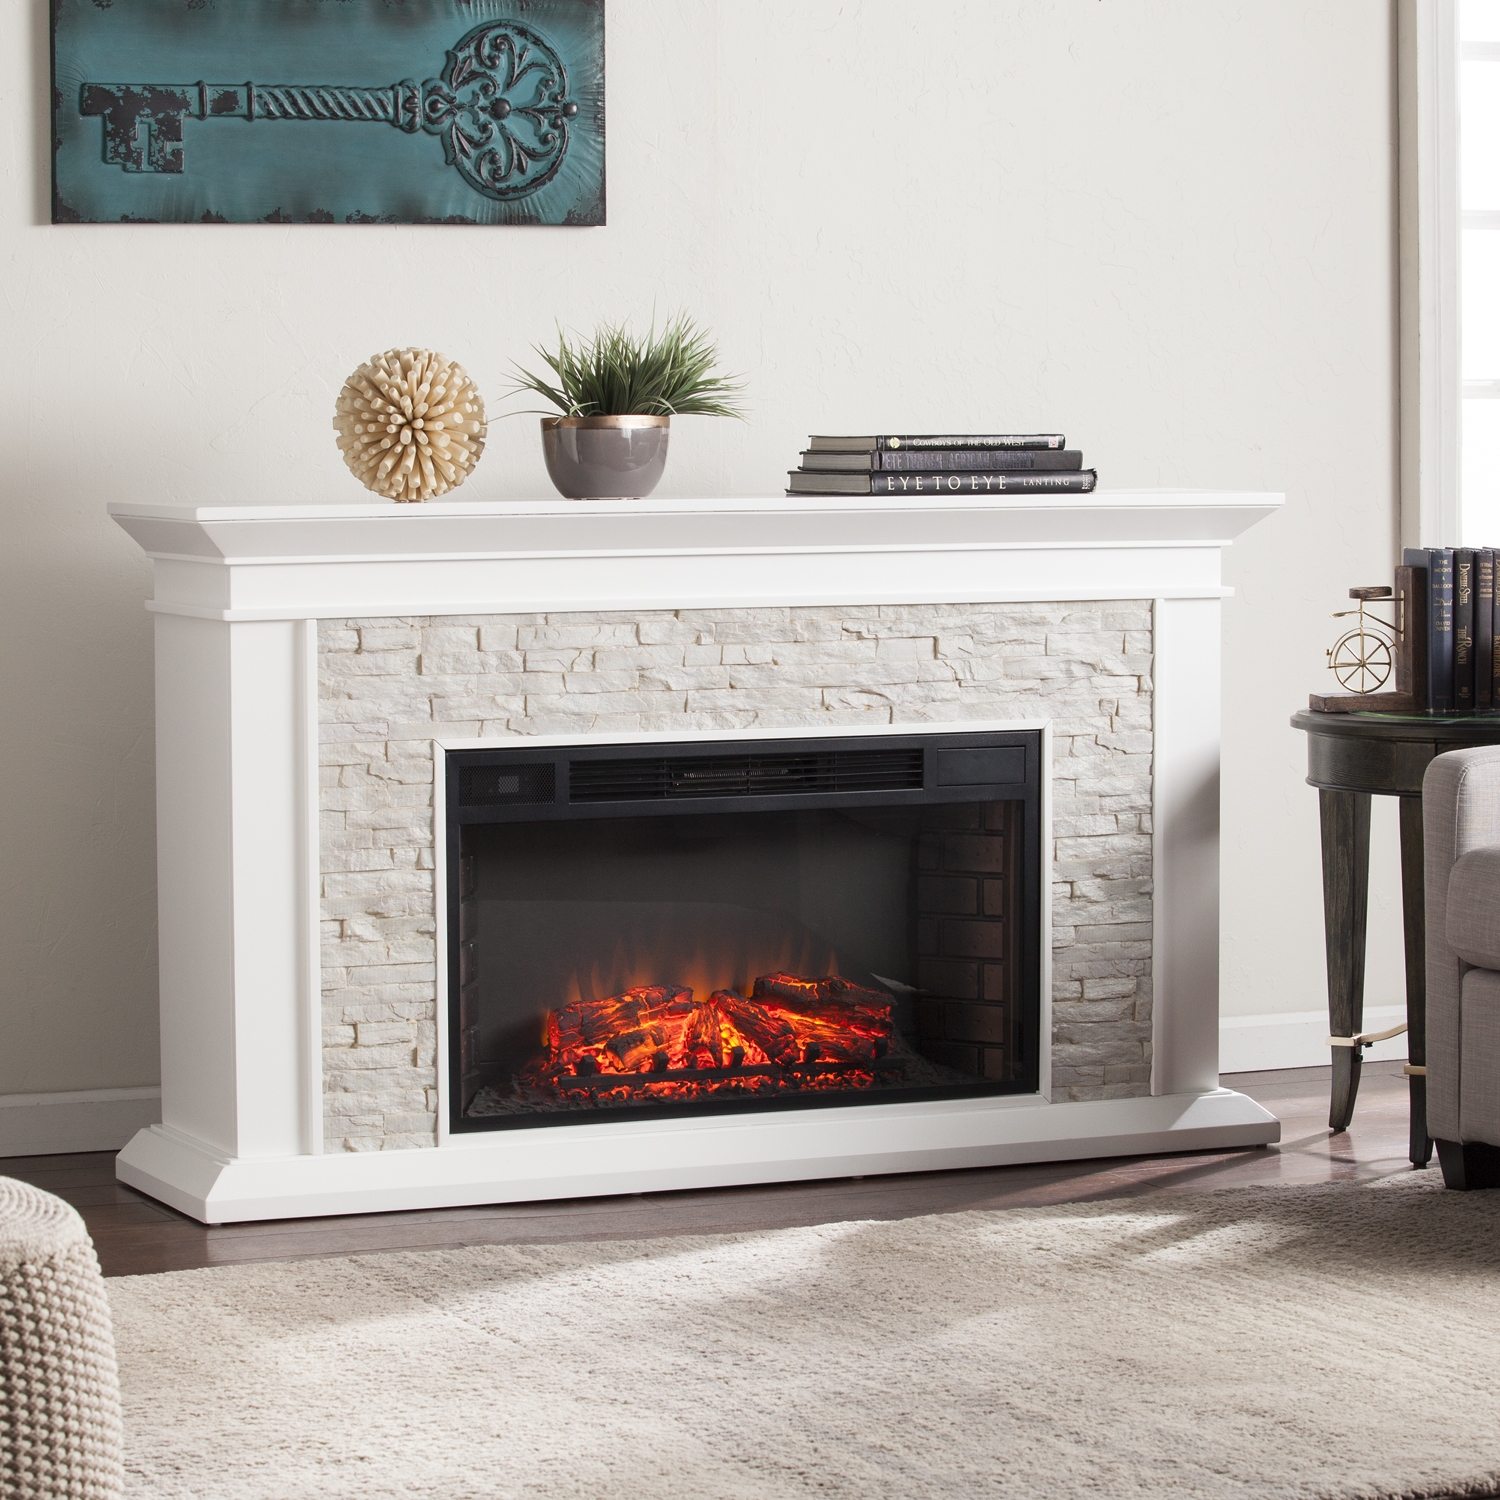 Georgetown Fireplace and Patio Fresh White Fireplace Electric Charming Fireplace